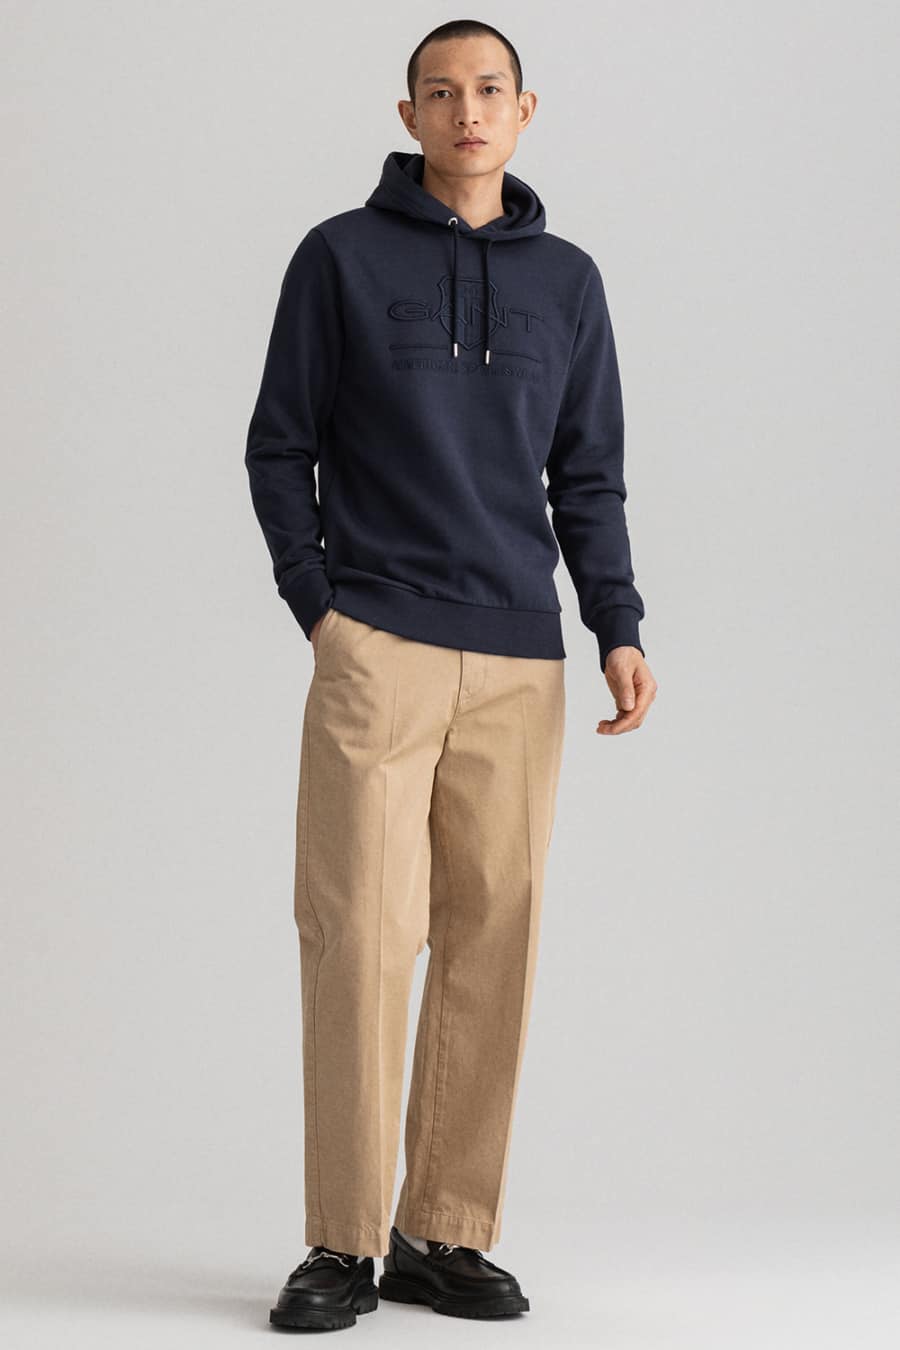 Men's loose khaki chino pants, navy hoodie and black leather loafers outfit